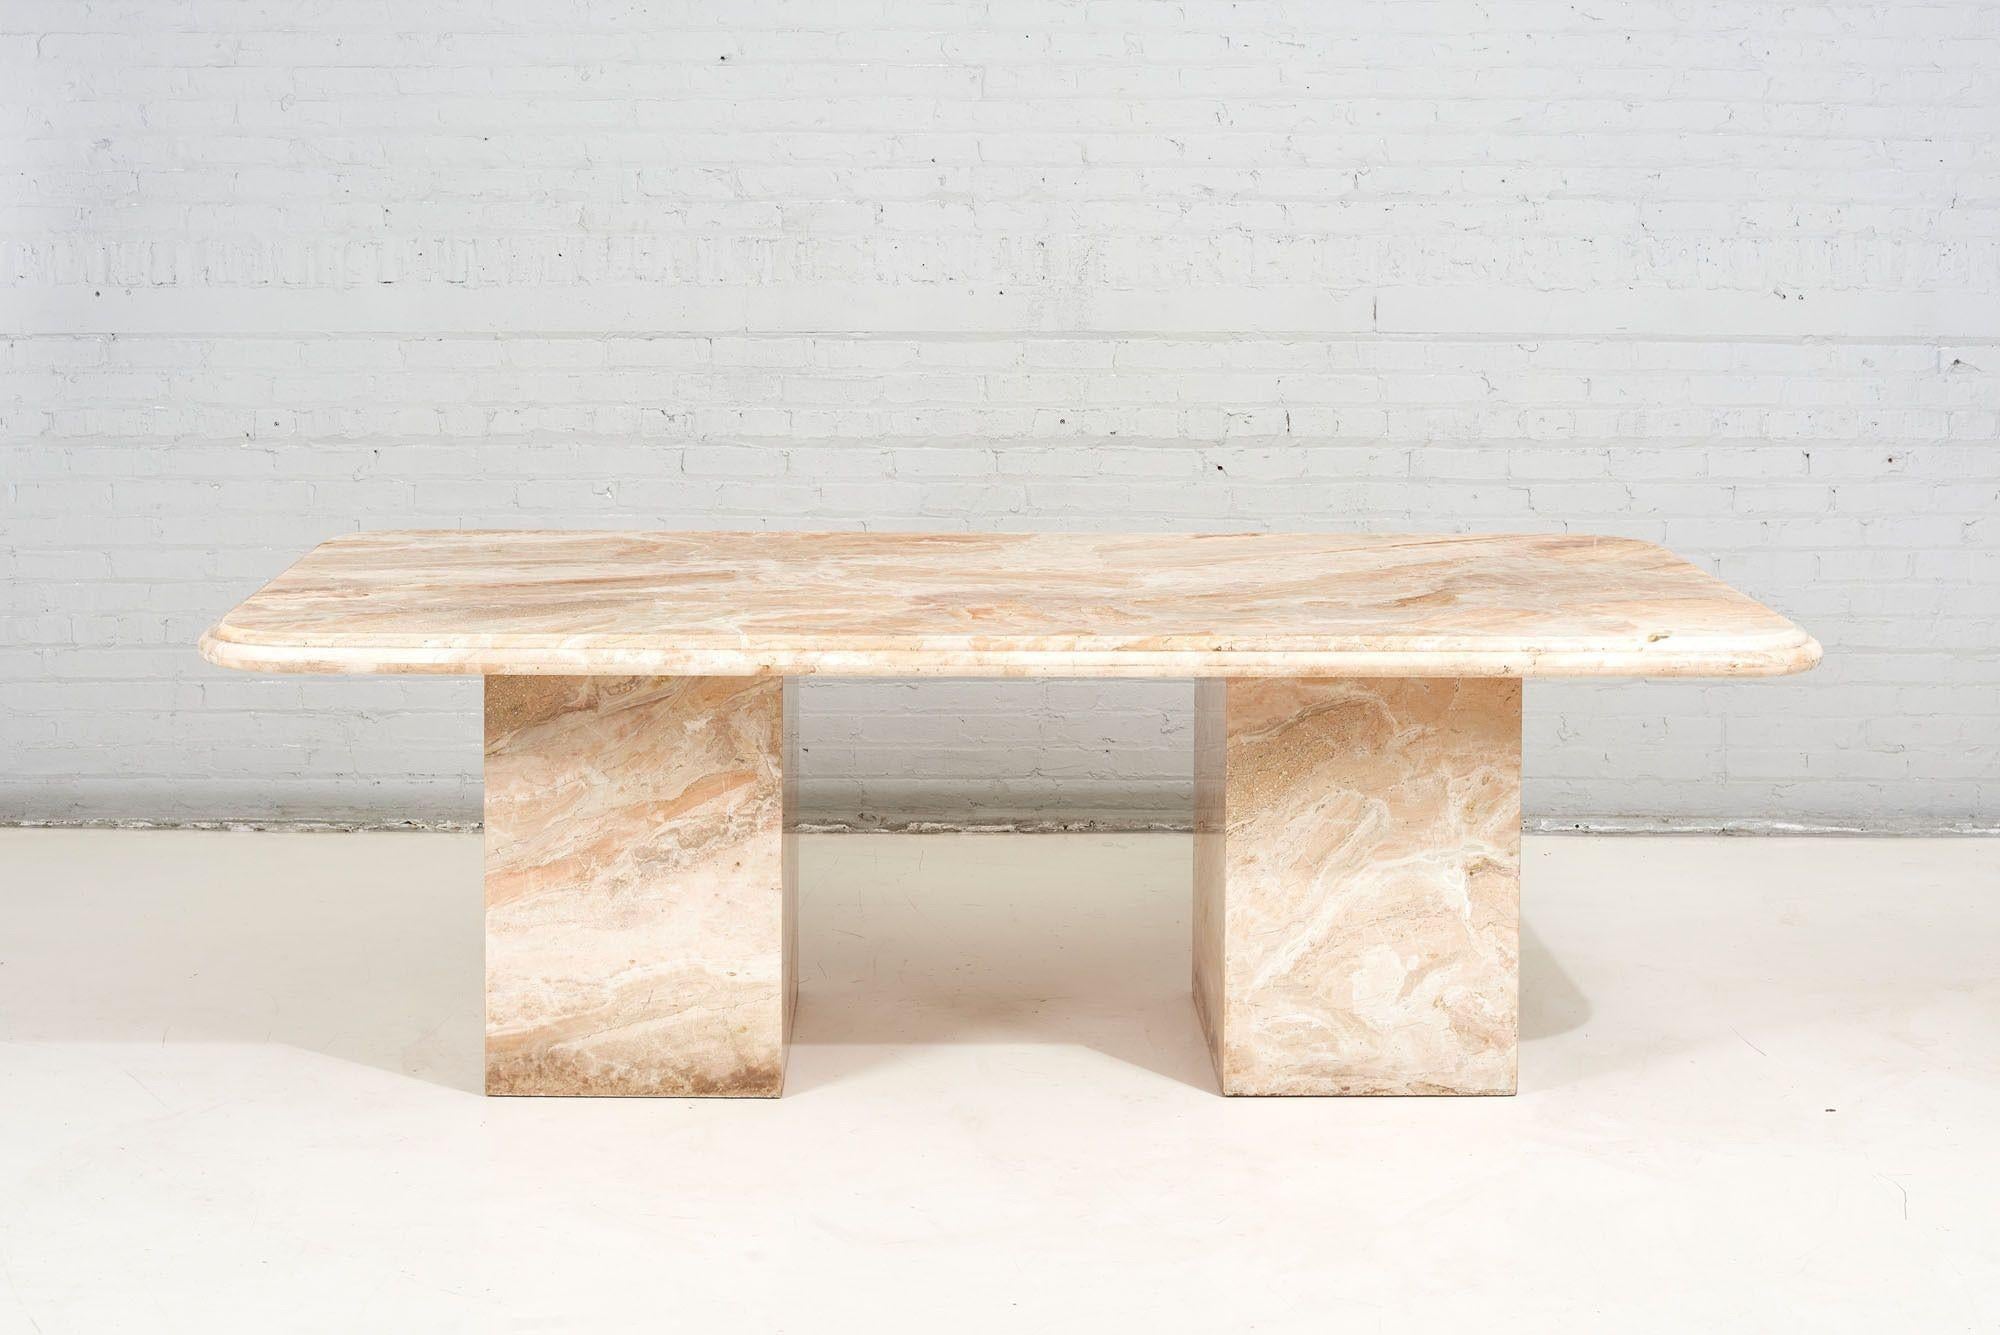 Breccia Oniciata marble double pedestal dining table, 1970. Italy.  Beautiful golden beige tones